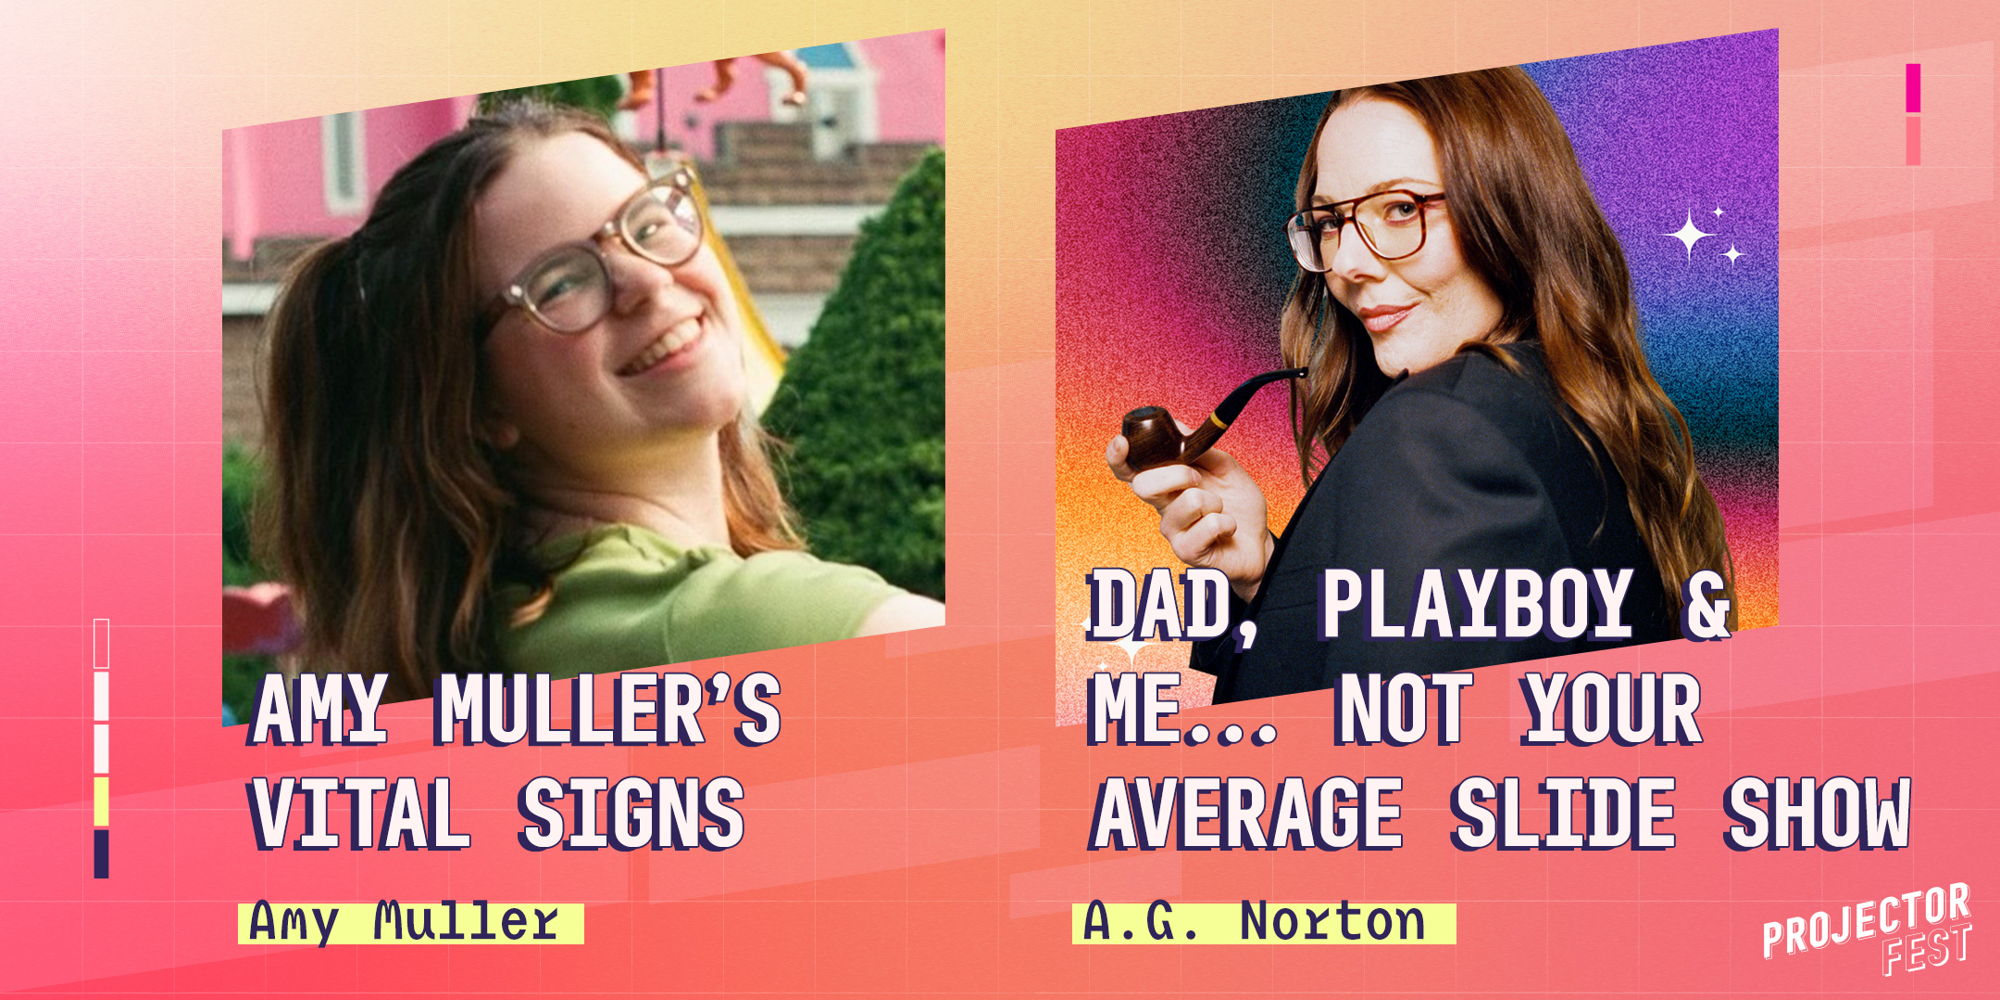 AMY MULLER'S VITAL SIGNS + DAD, PLAYBOY & ME... NOT YOUR AVERAGE SLIDESHOW promotional image